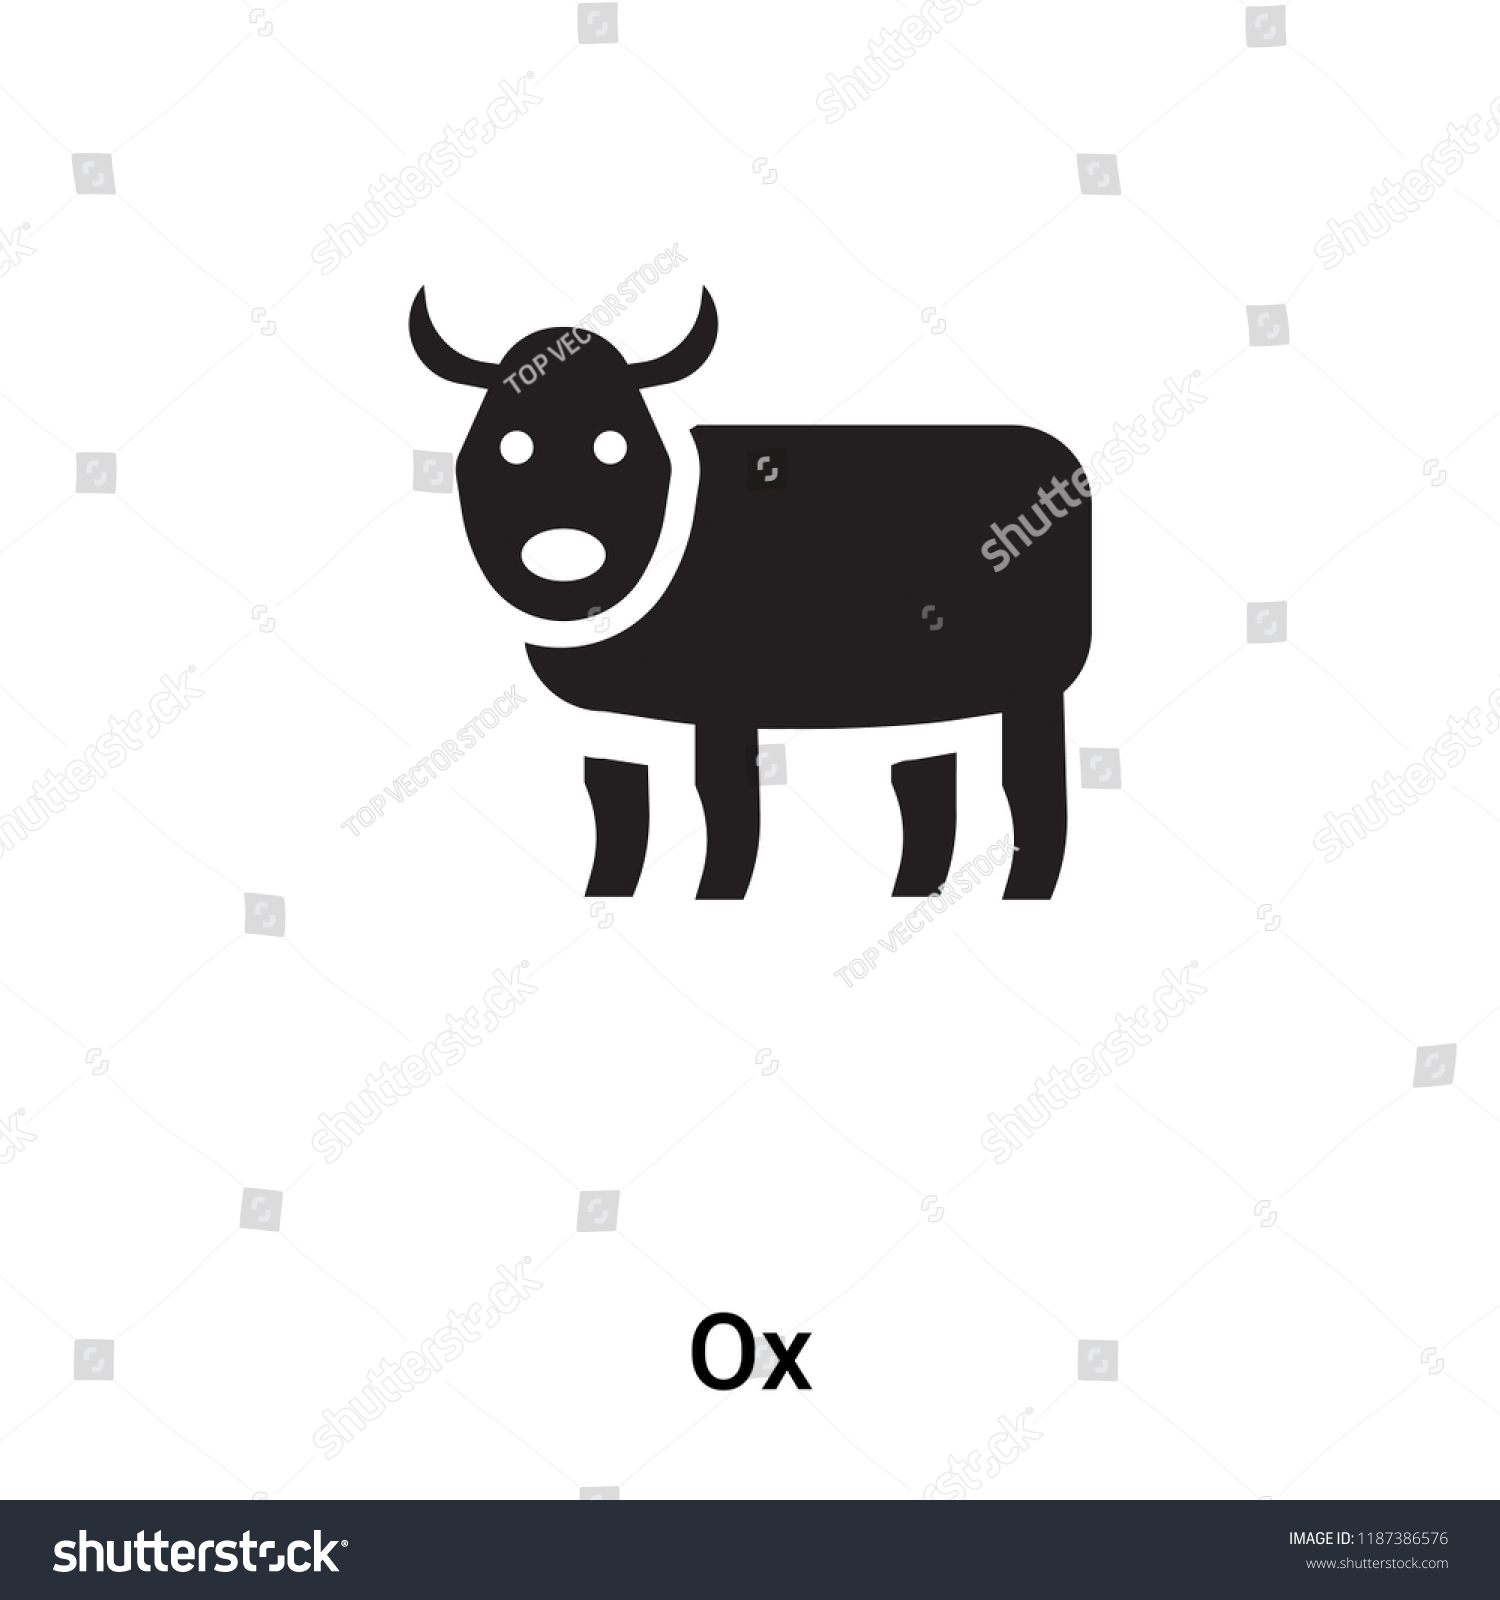 SVG of Ox icon vector isolated on white background, logo concept of Ox sign on transparent background, filled black symbol svg